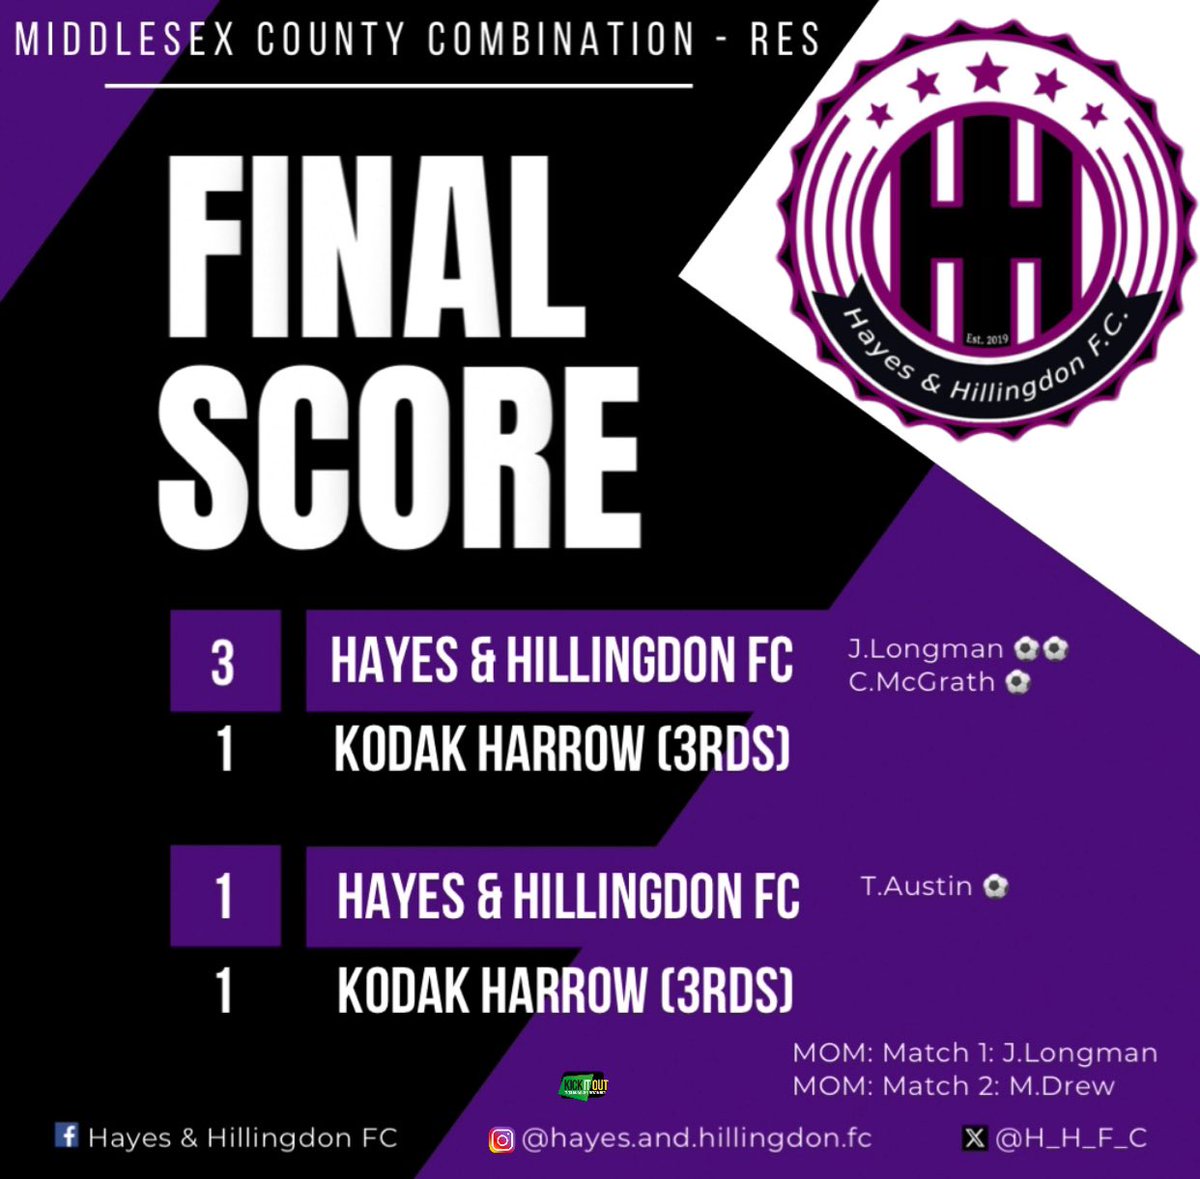 A frustrating afternoon as our firsts draw at home to Stonewall.

⚽️;S.Baigent

MOM:J.Shepherd⭐️DOM:A.Okolo🫏

A deserved win for our reserves in game one.

MOM:Match 1; J.Longman⭐️DOM;C. Shaw🫏 
MOM:Match 2; M.Drew⭐️DOM; E.Di Lima 🫏 

#HHFC #morethanafootballclub 
💜🖤